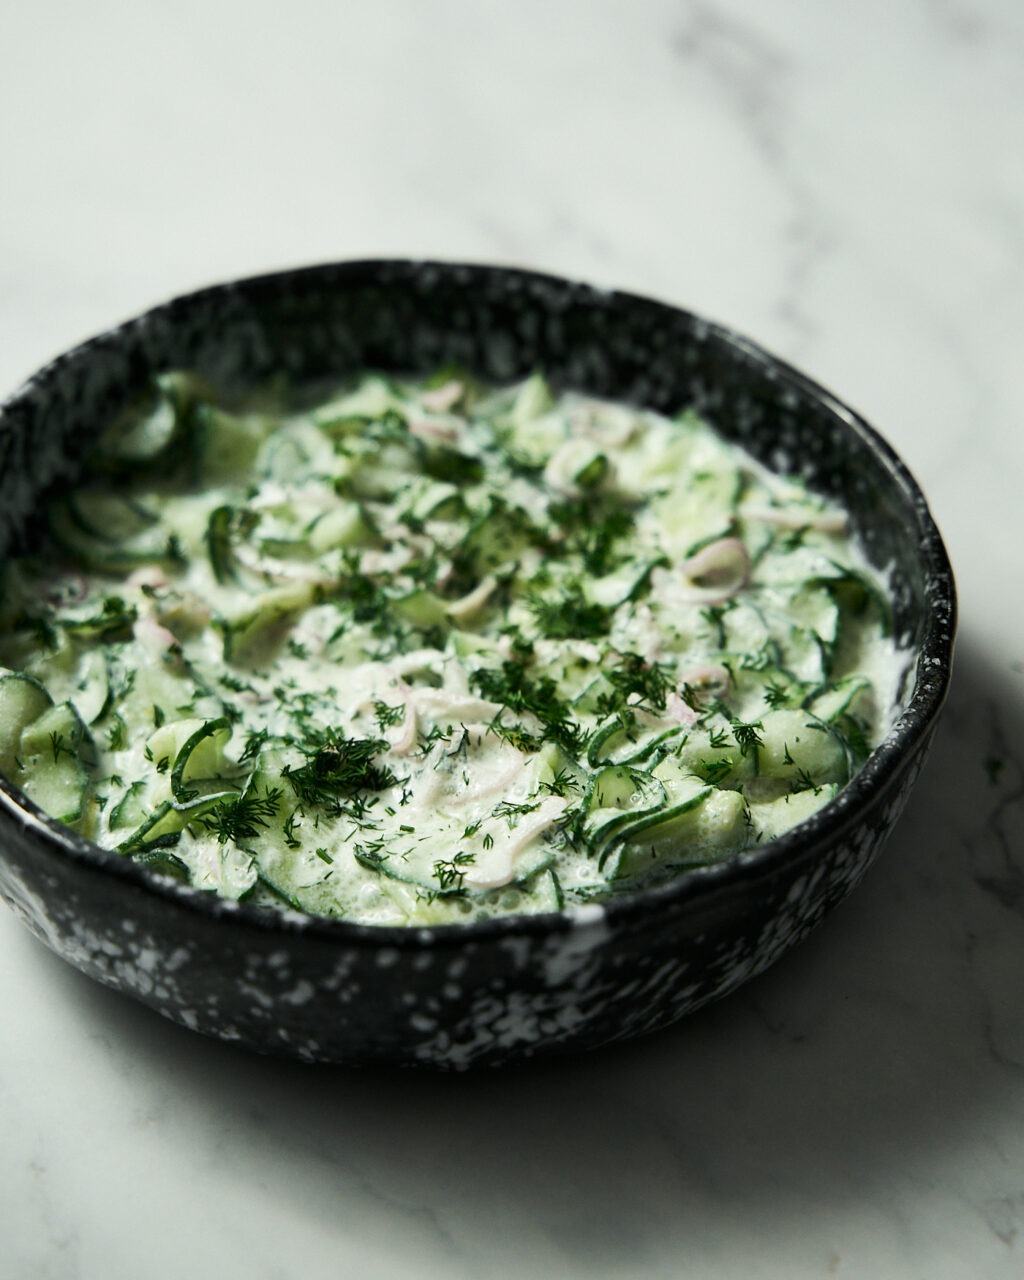 Cucumber salad with sour cream, onion and dill